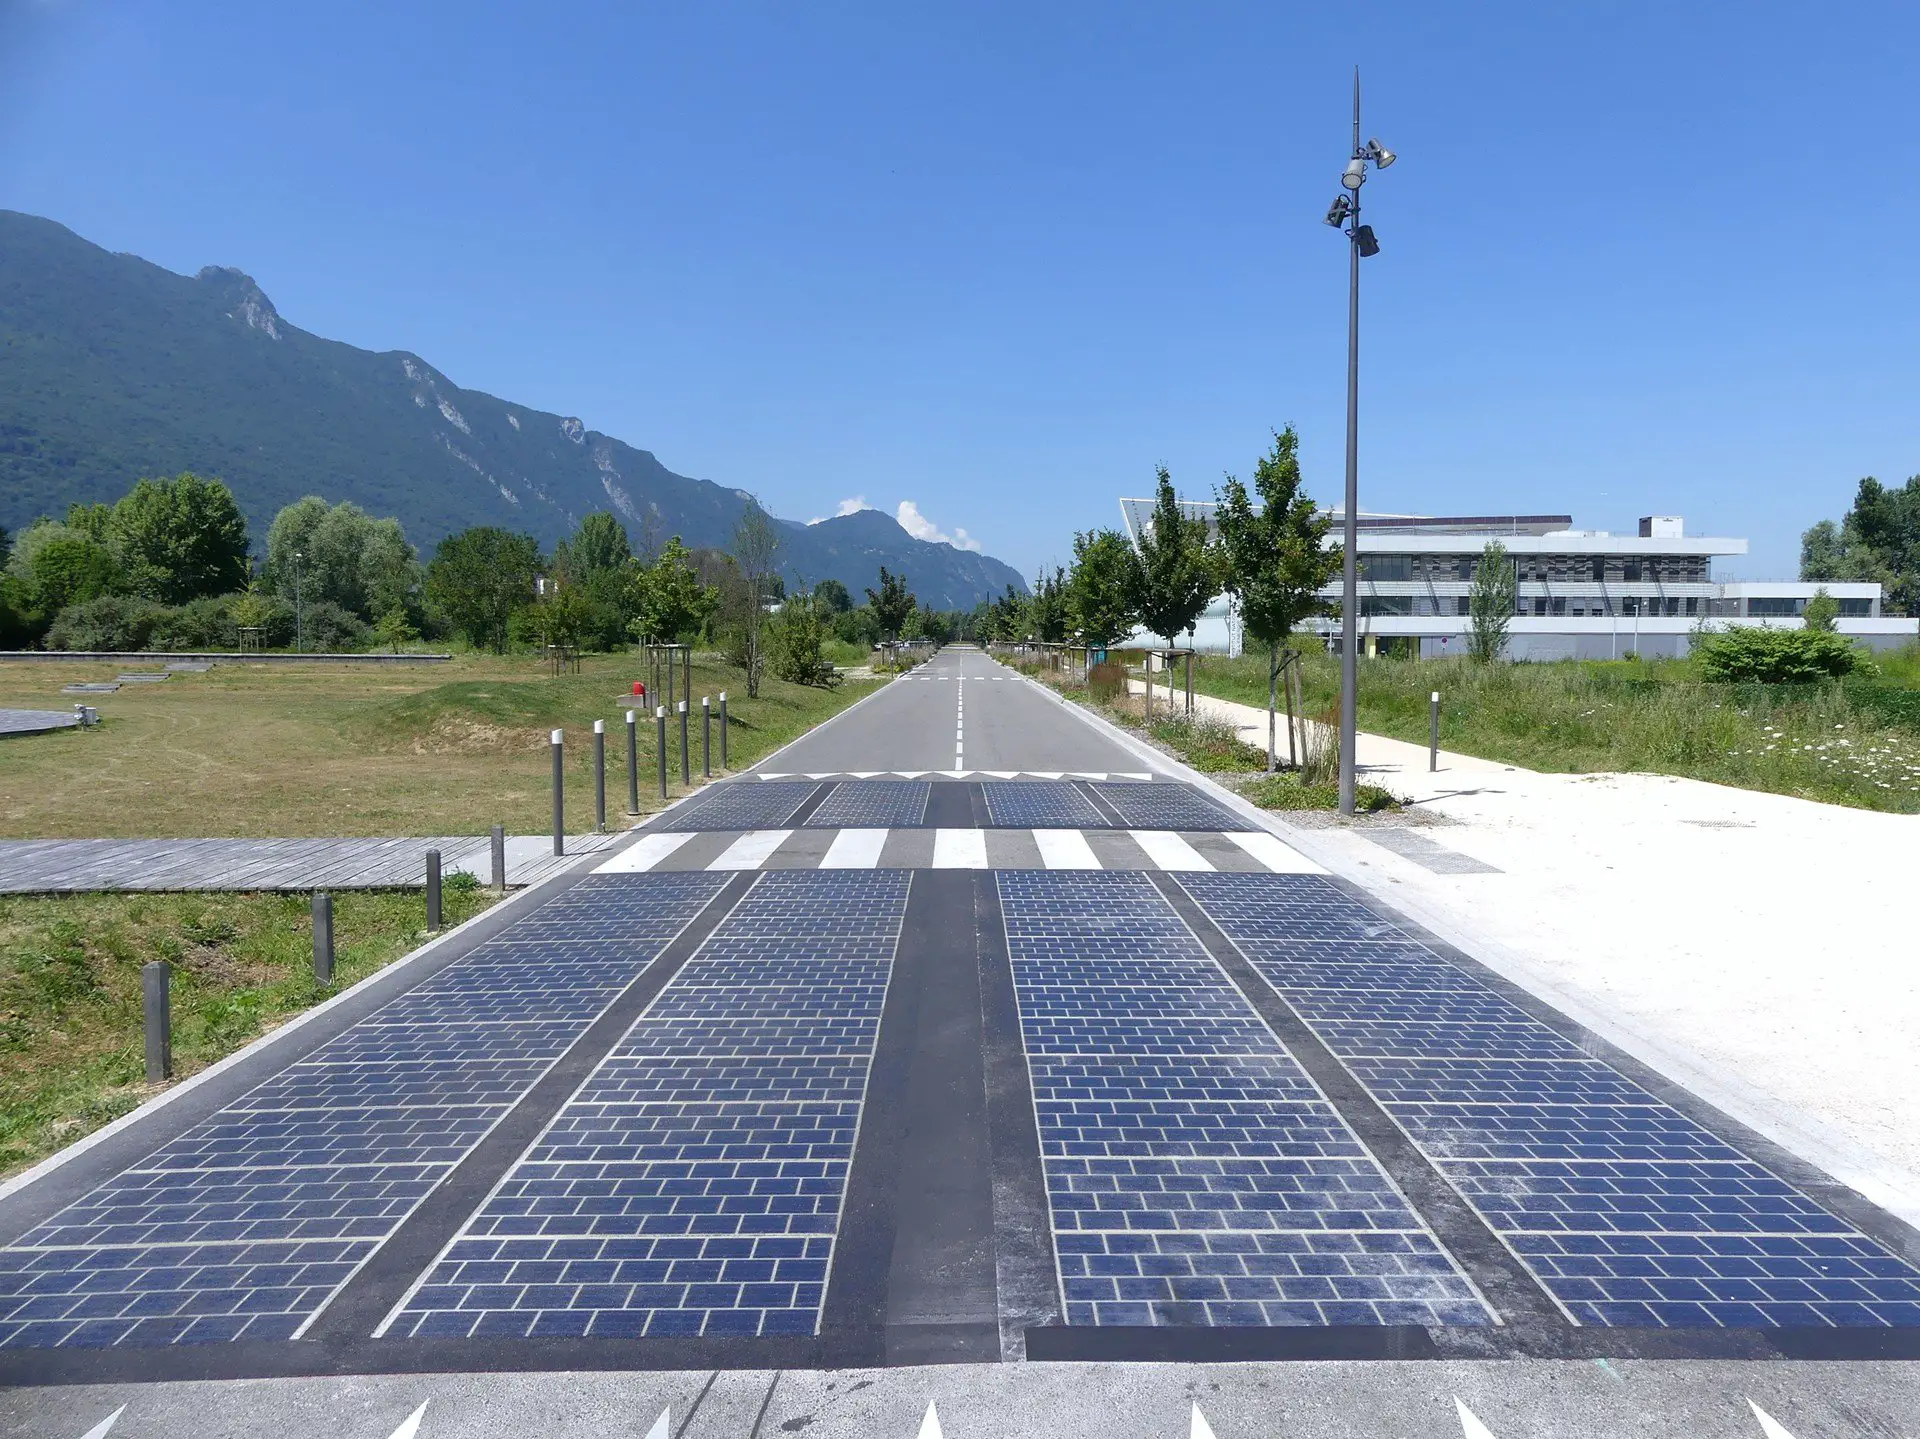 Its Official: Solar Roads Are Another Government